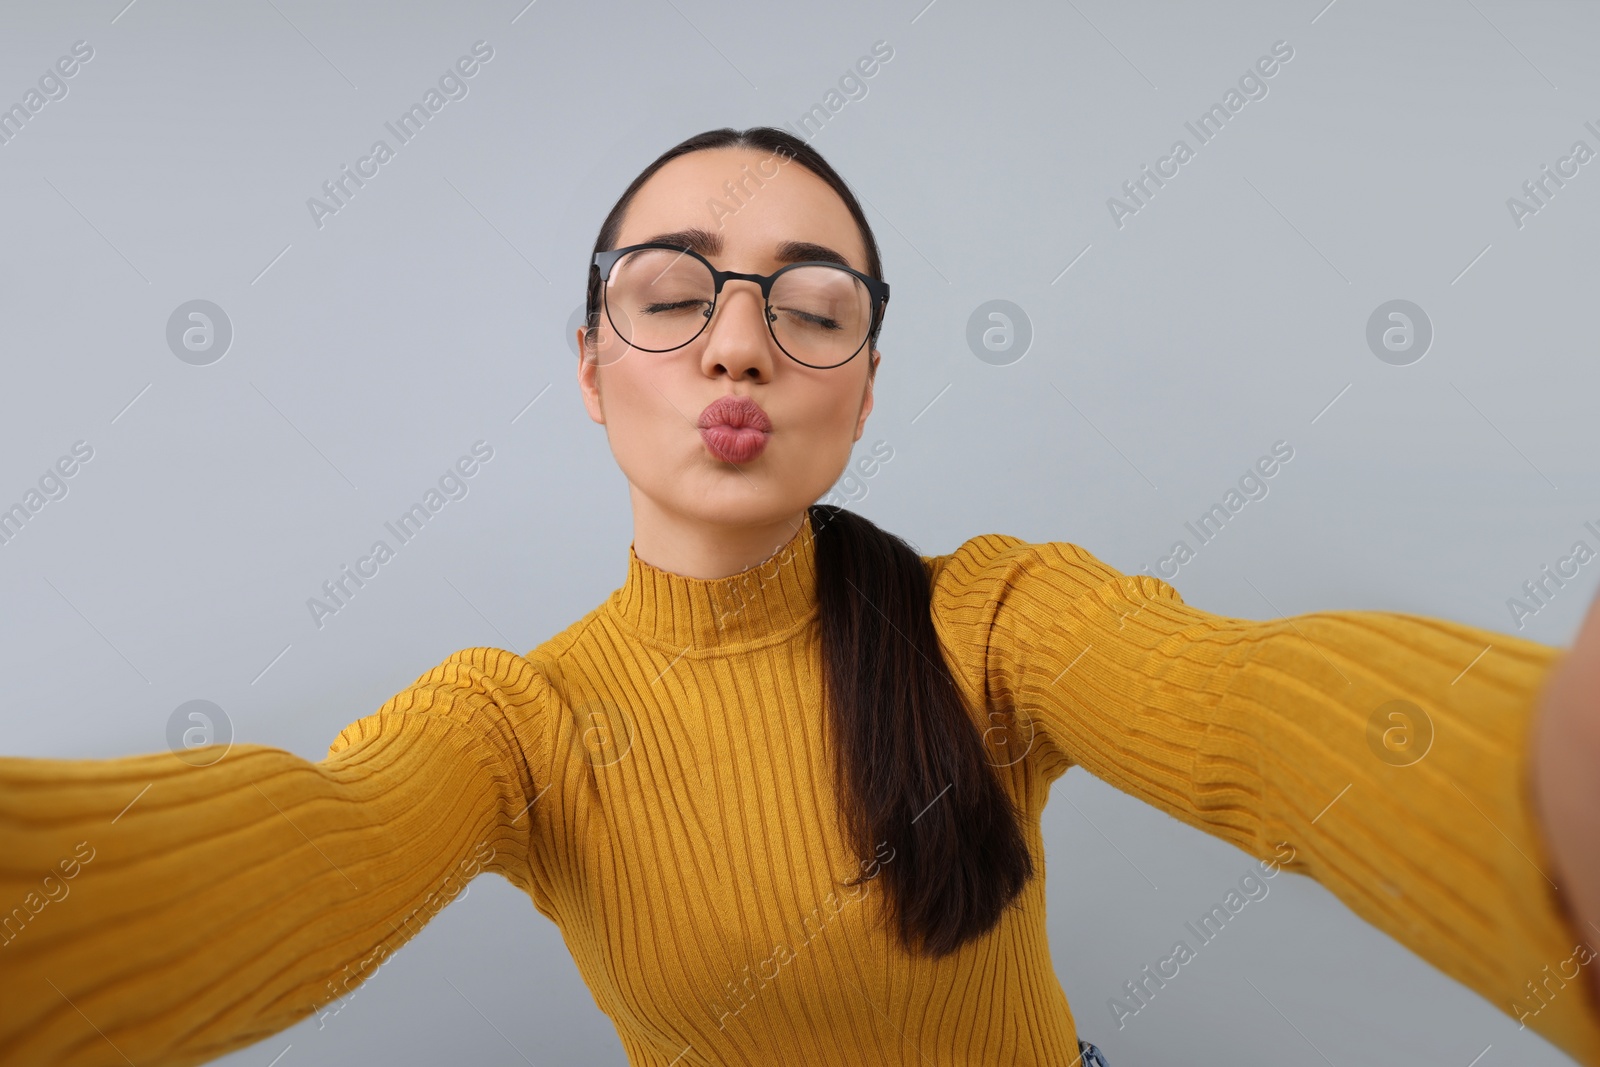 Photo of Young woman taking selfie and blowing kiss on grey background